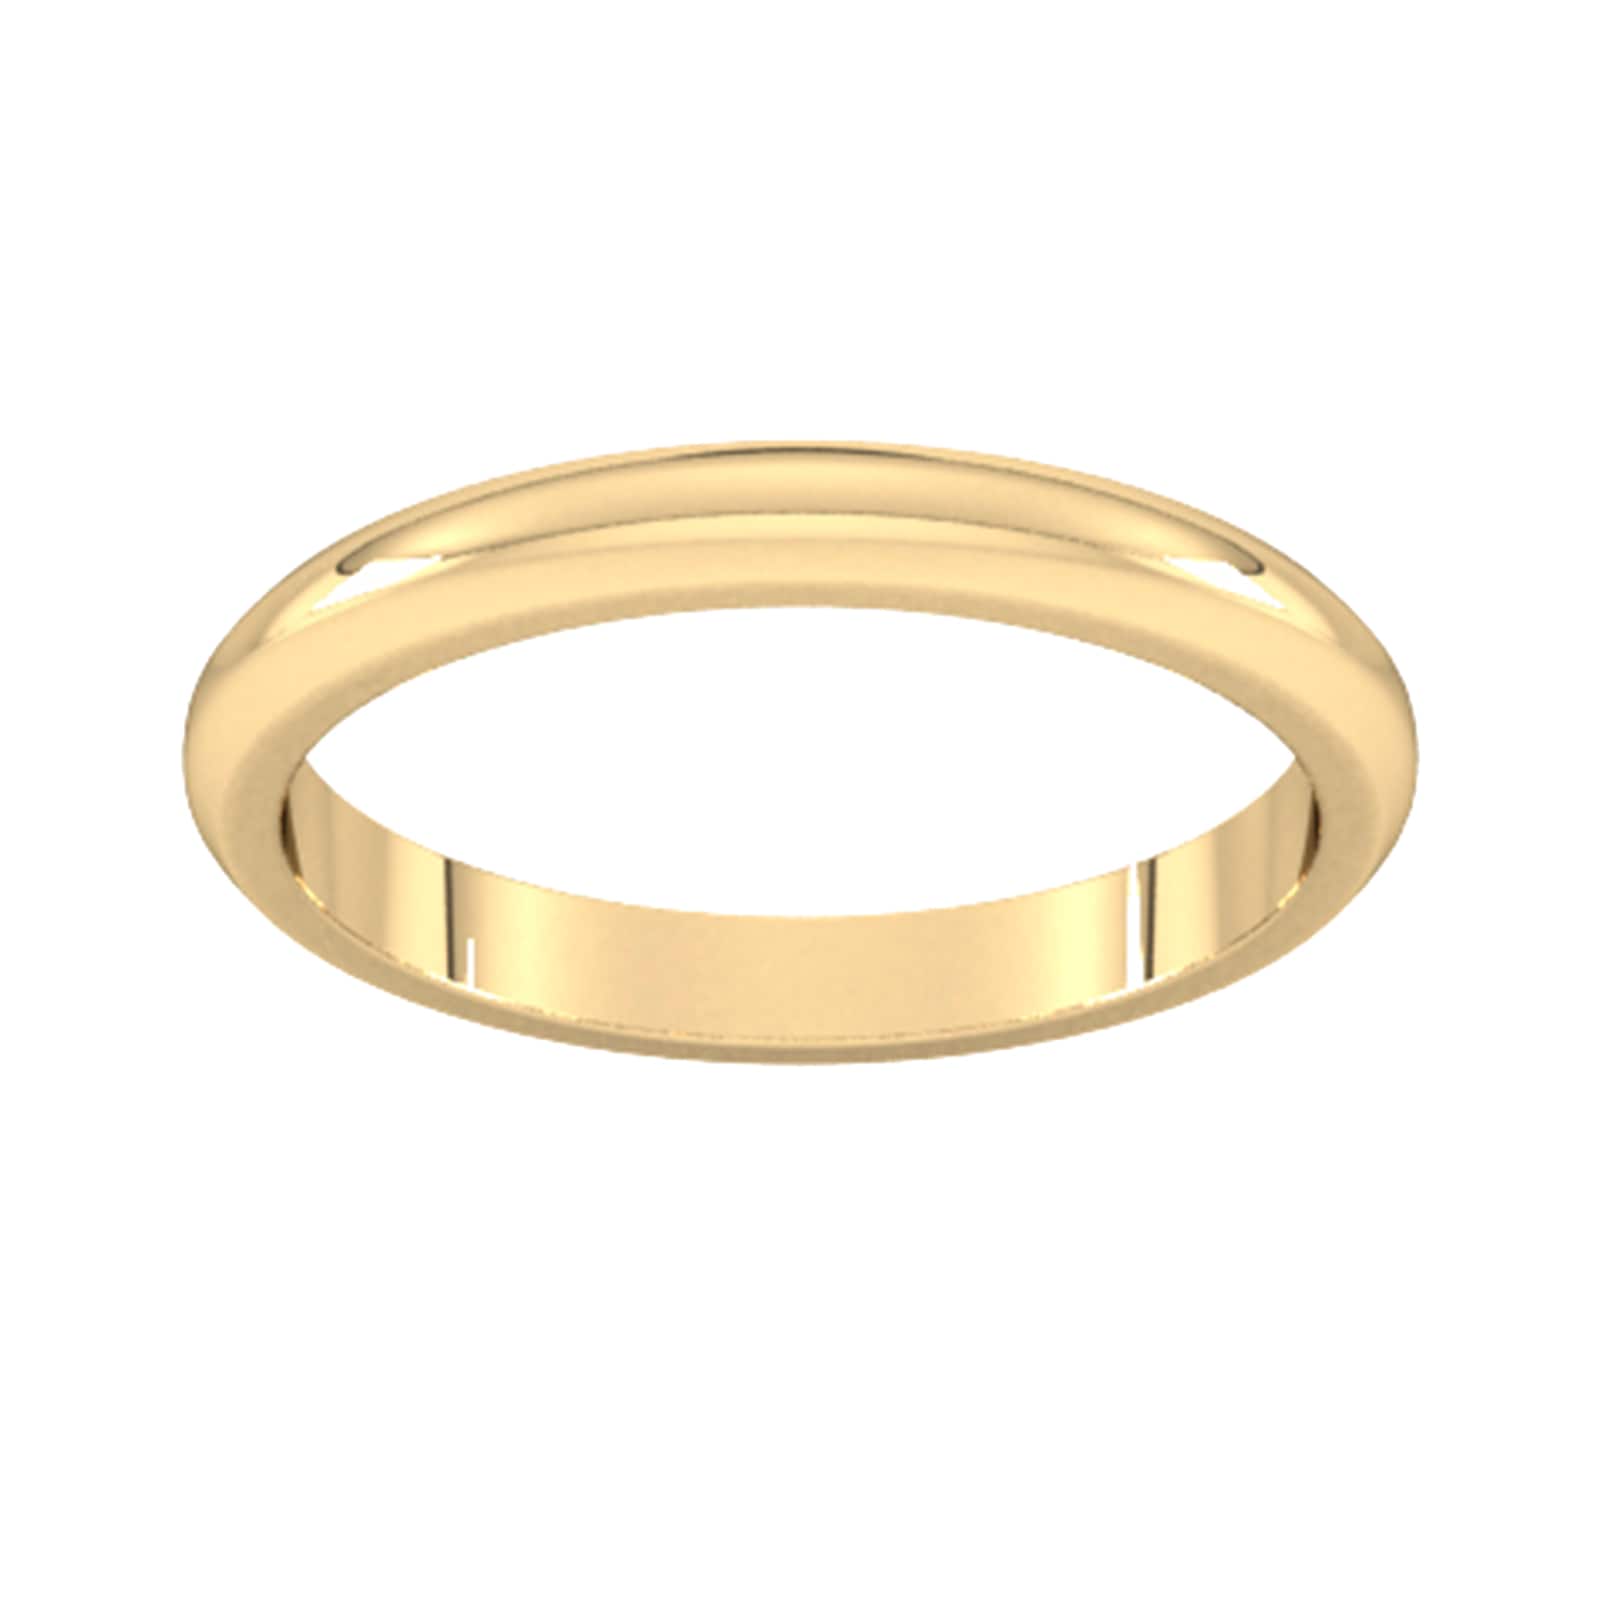 2.5mm D Shape Heavy Wedding Ring In 18 Carat Yellow Gold - Ring Size G